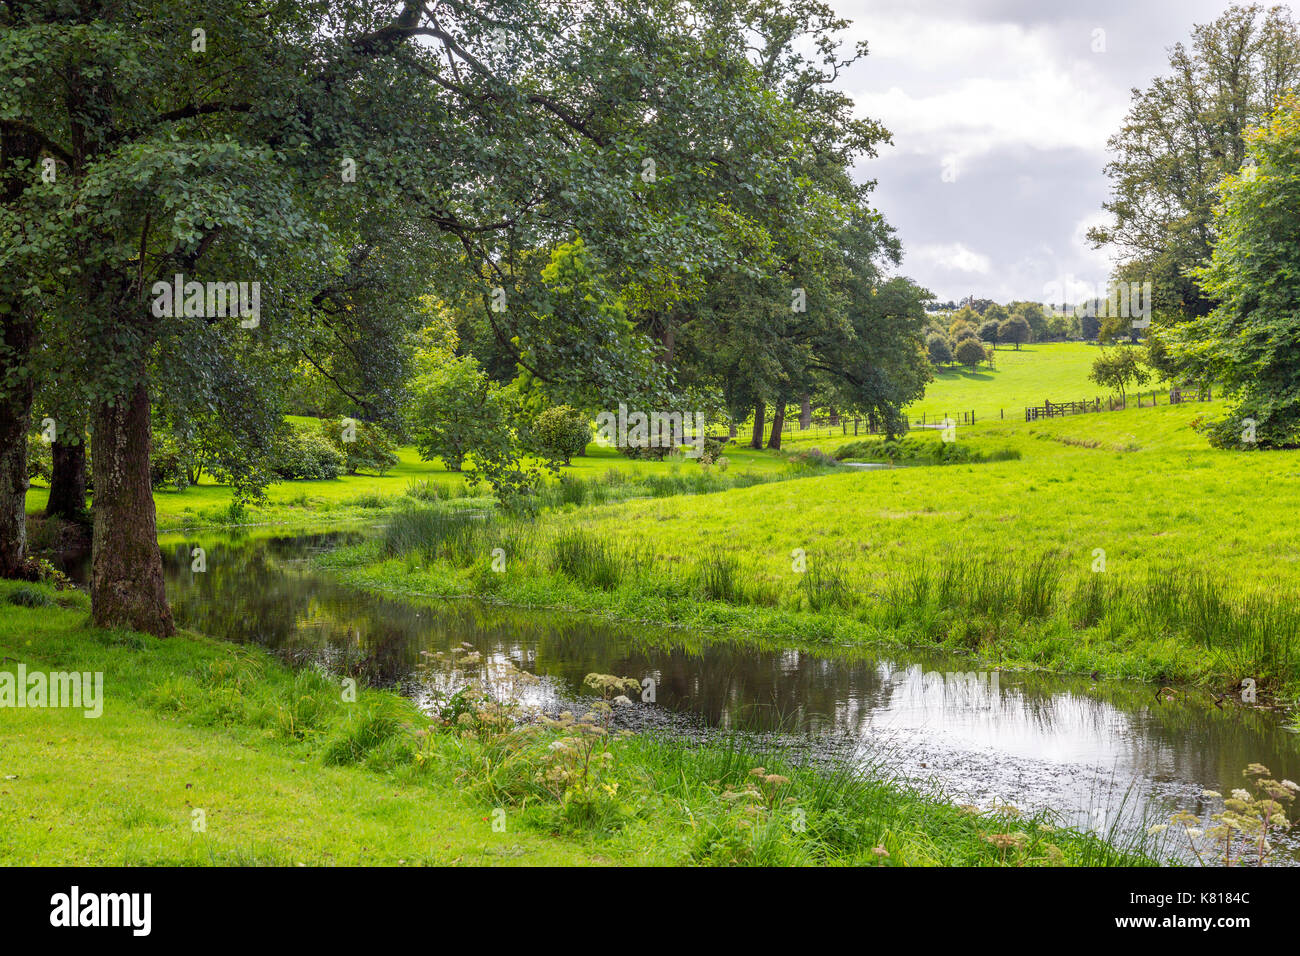 A tributary of the River Bray in the grounds of Castle Hill House and Gardens, near Filleigh, North Devon, England,UK Stock Photo